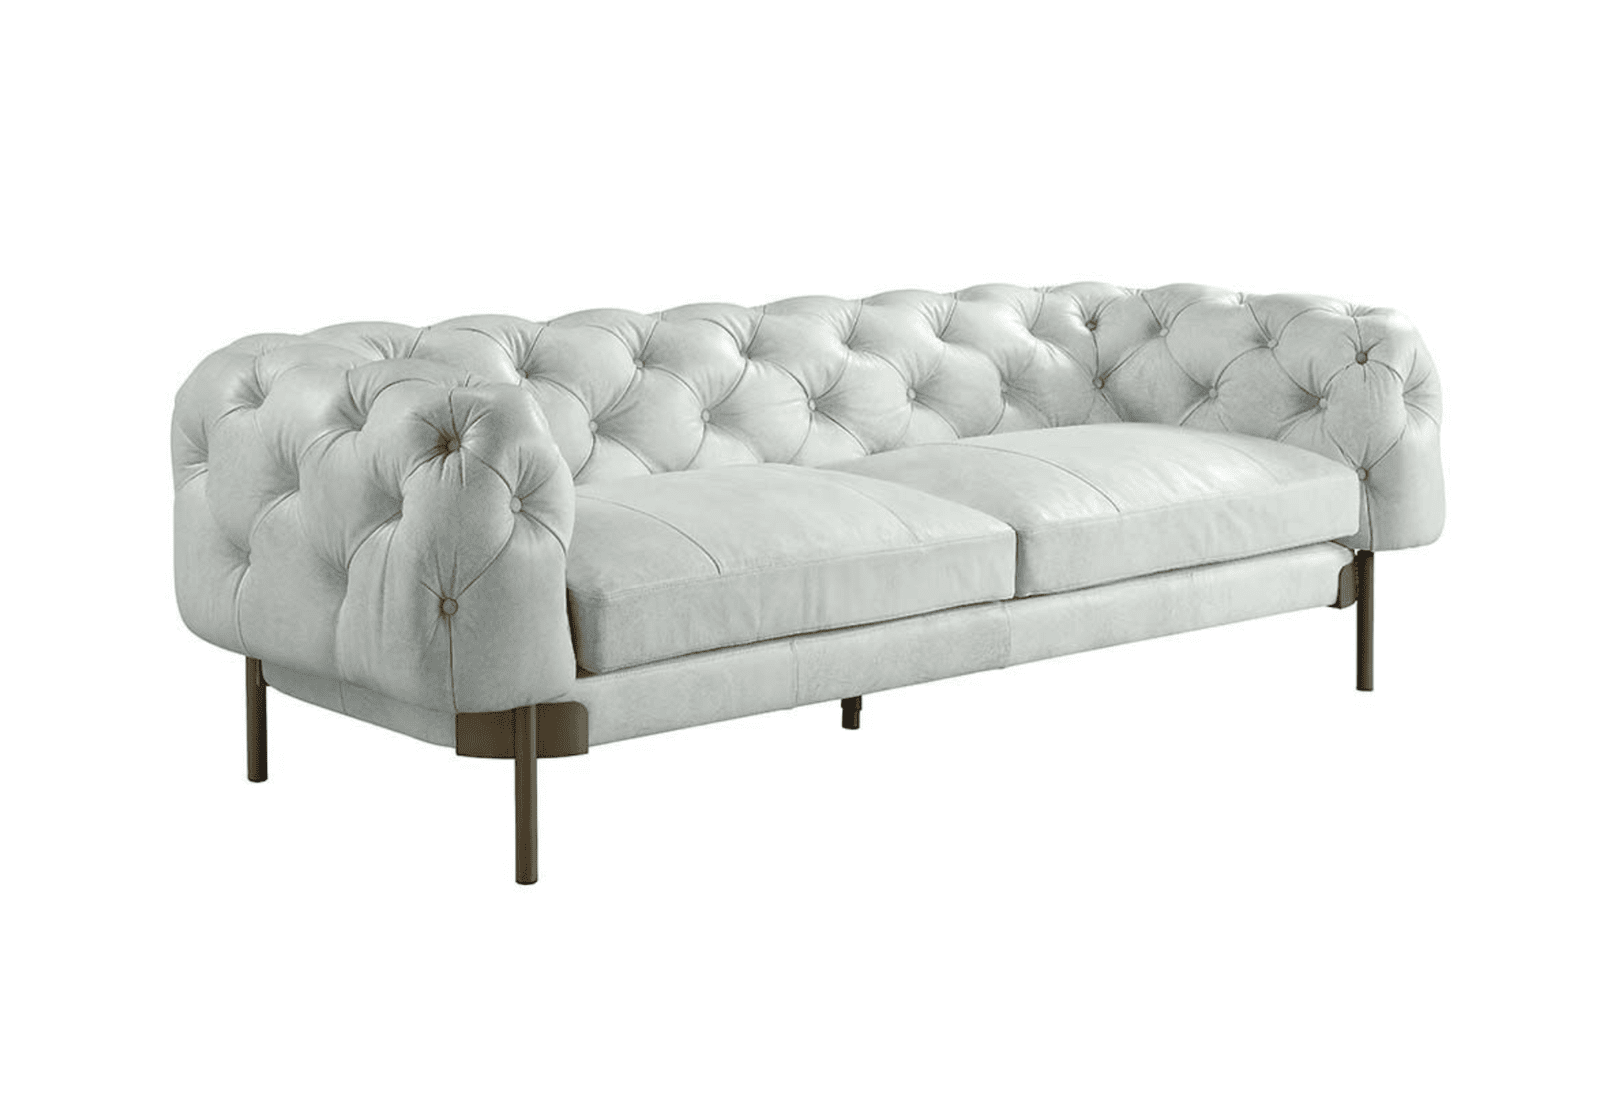 Ragle Modern Chesterfield Sofa in Vintage White Top Grain Leather